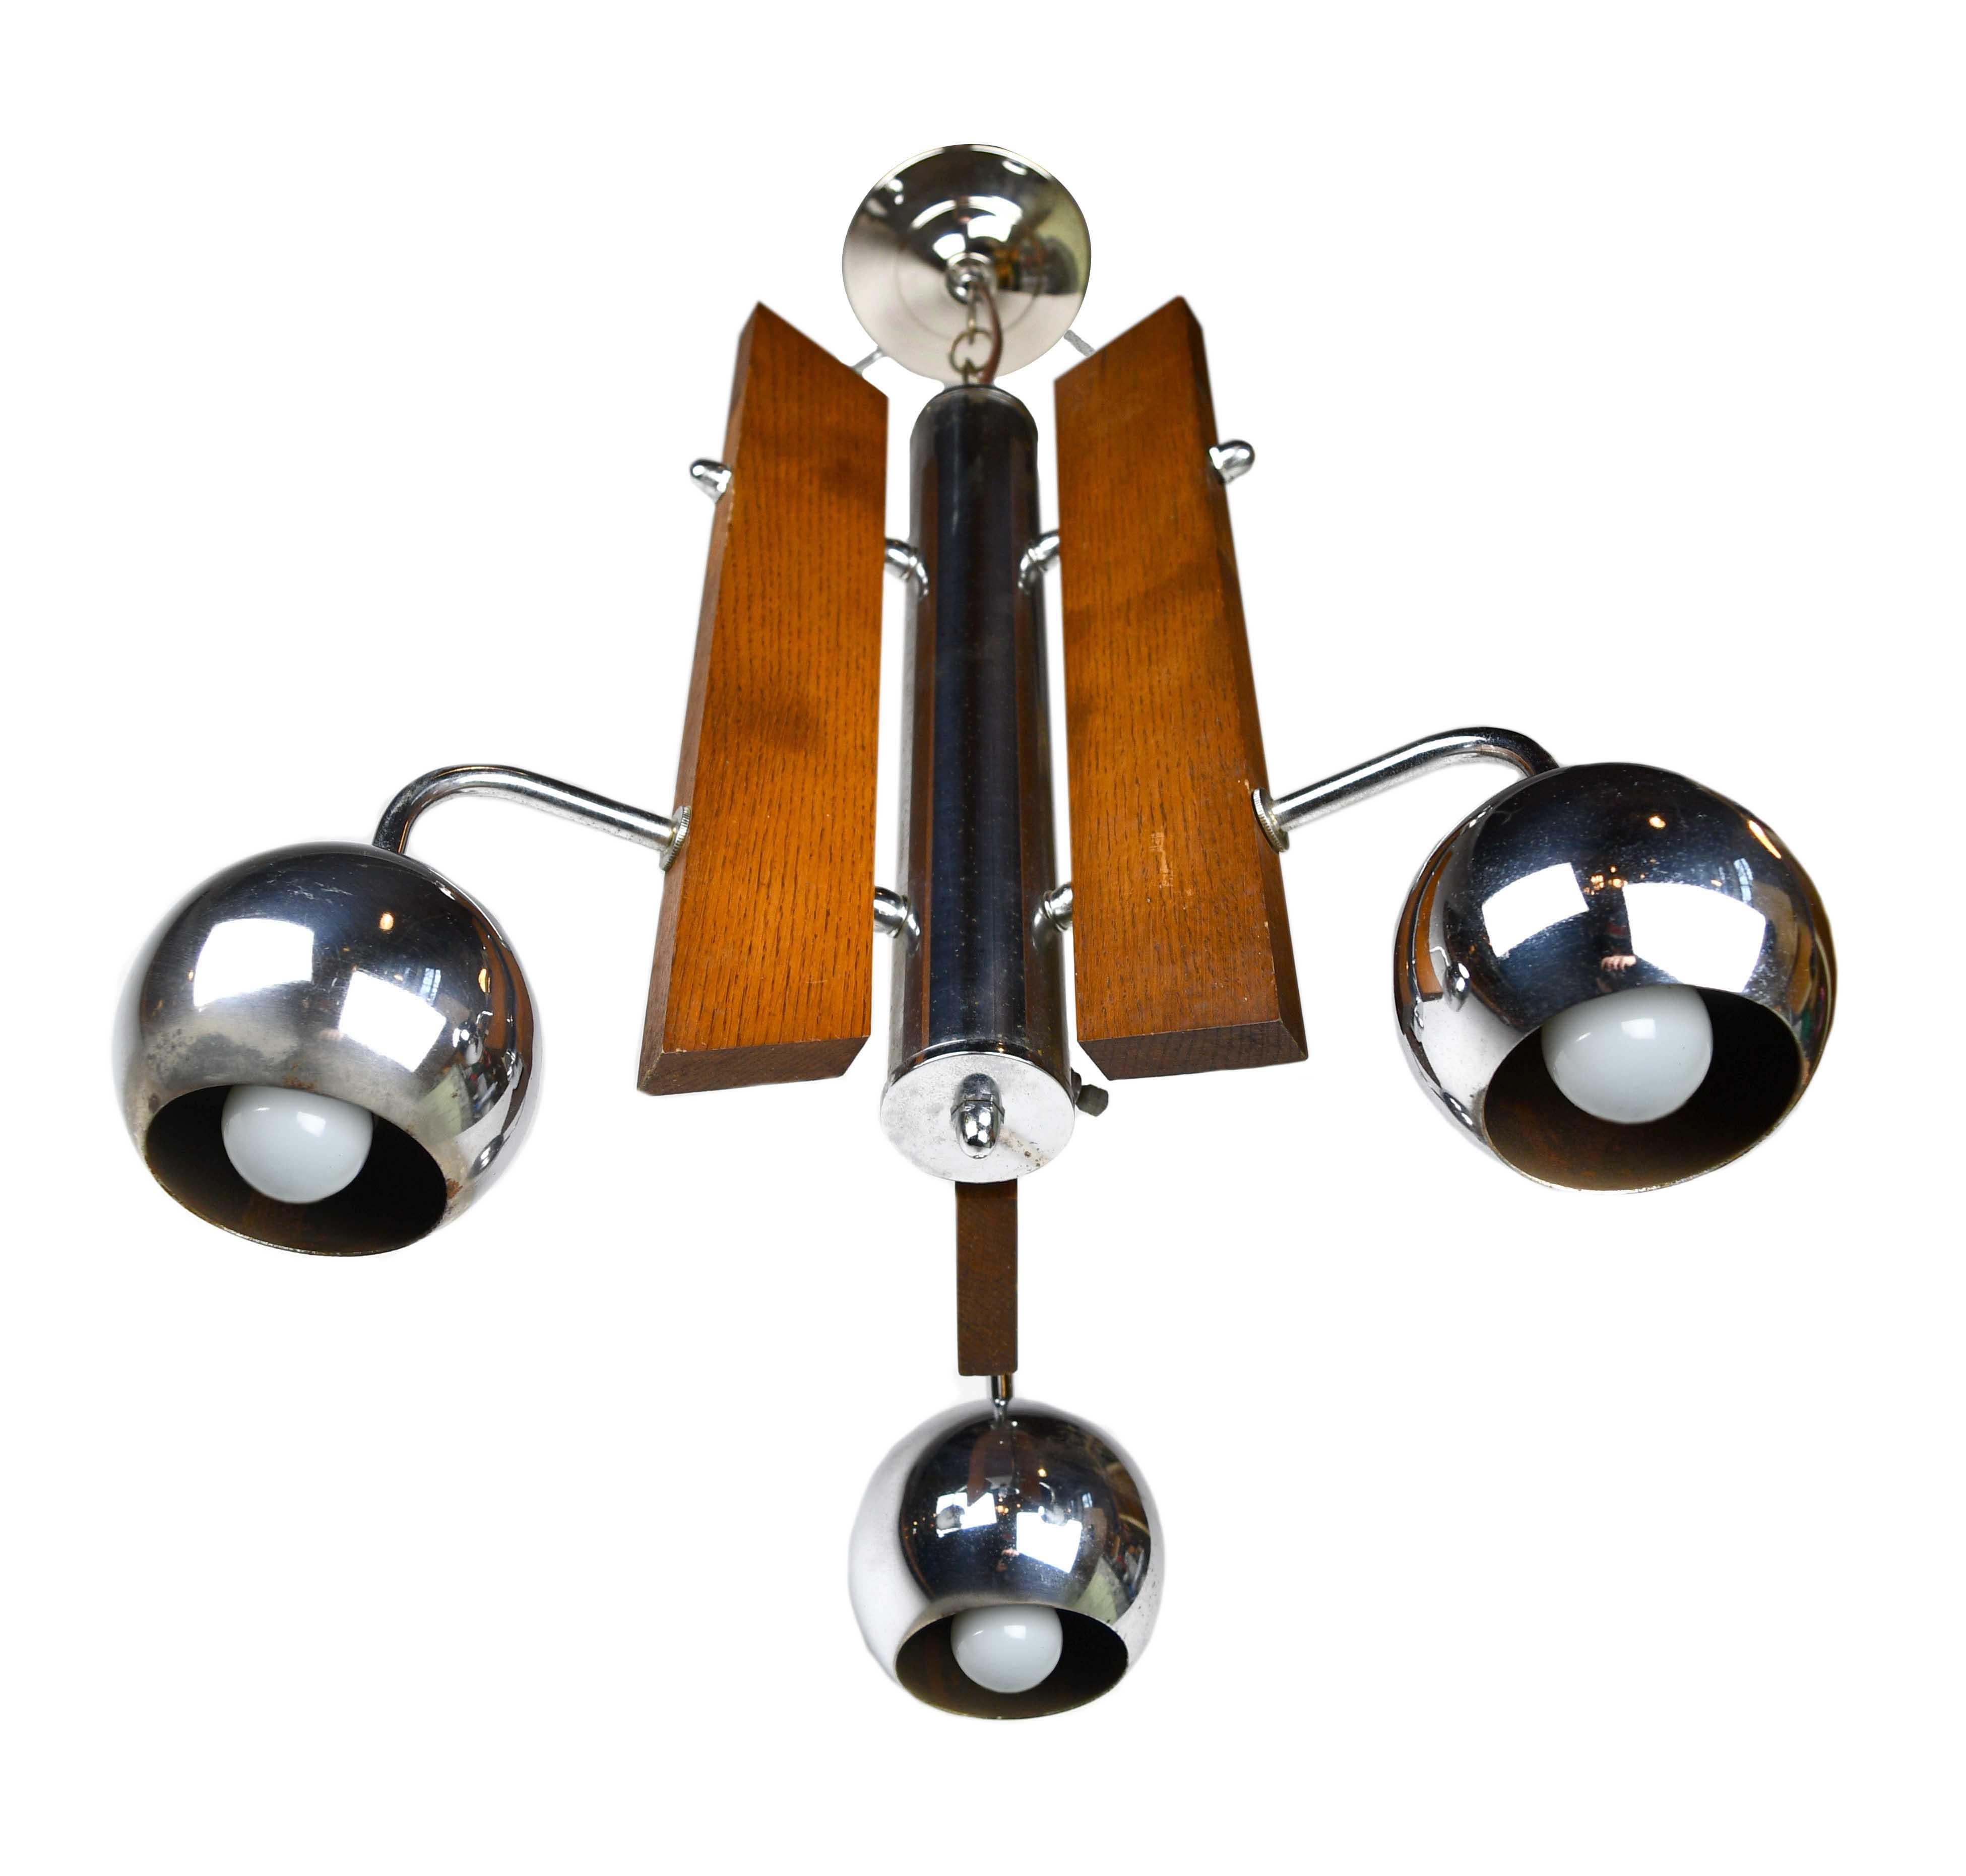 Mid-Century Modern Space Age style chandelier with an interesting mix of wood and chrome, playful in its display of wood grain and shiny surfaces,

circa 1970
Condition: Fair
Finish: Original
Bulb: Medium base S-11 7.5 watts

23 1/2